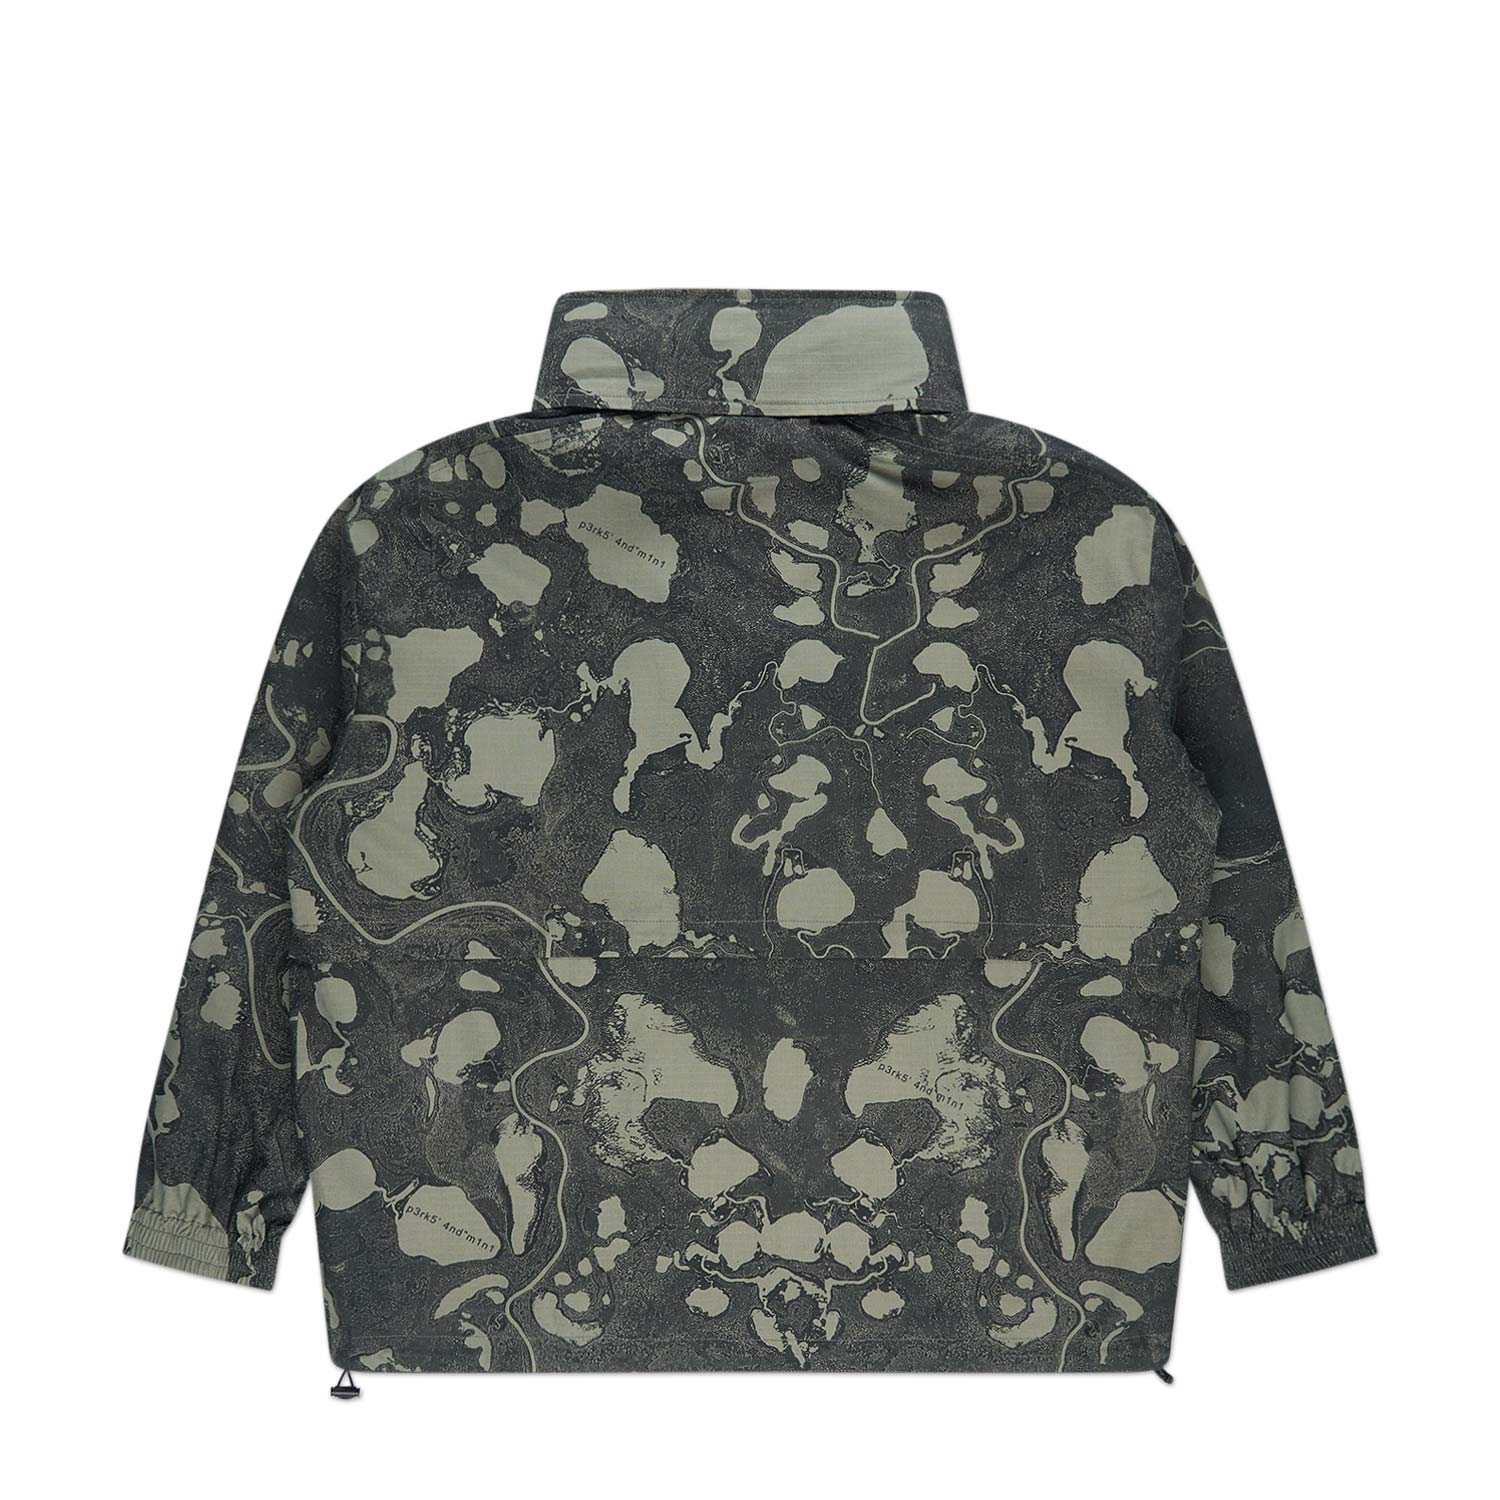 perks and mini reversible geo mapping parka jacket (swamp) - a